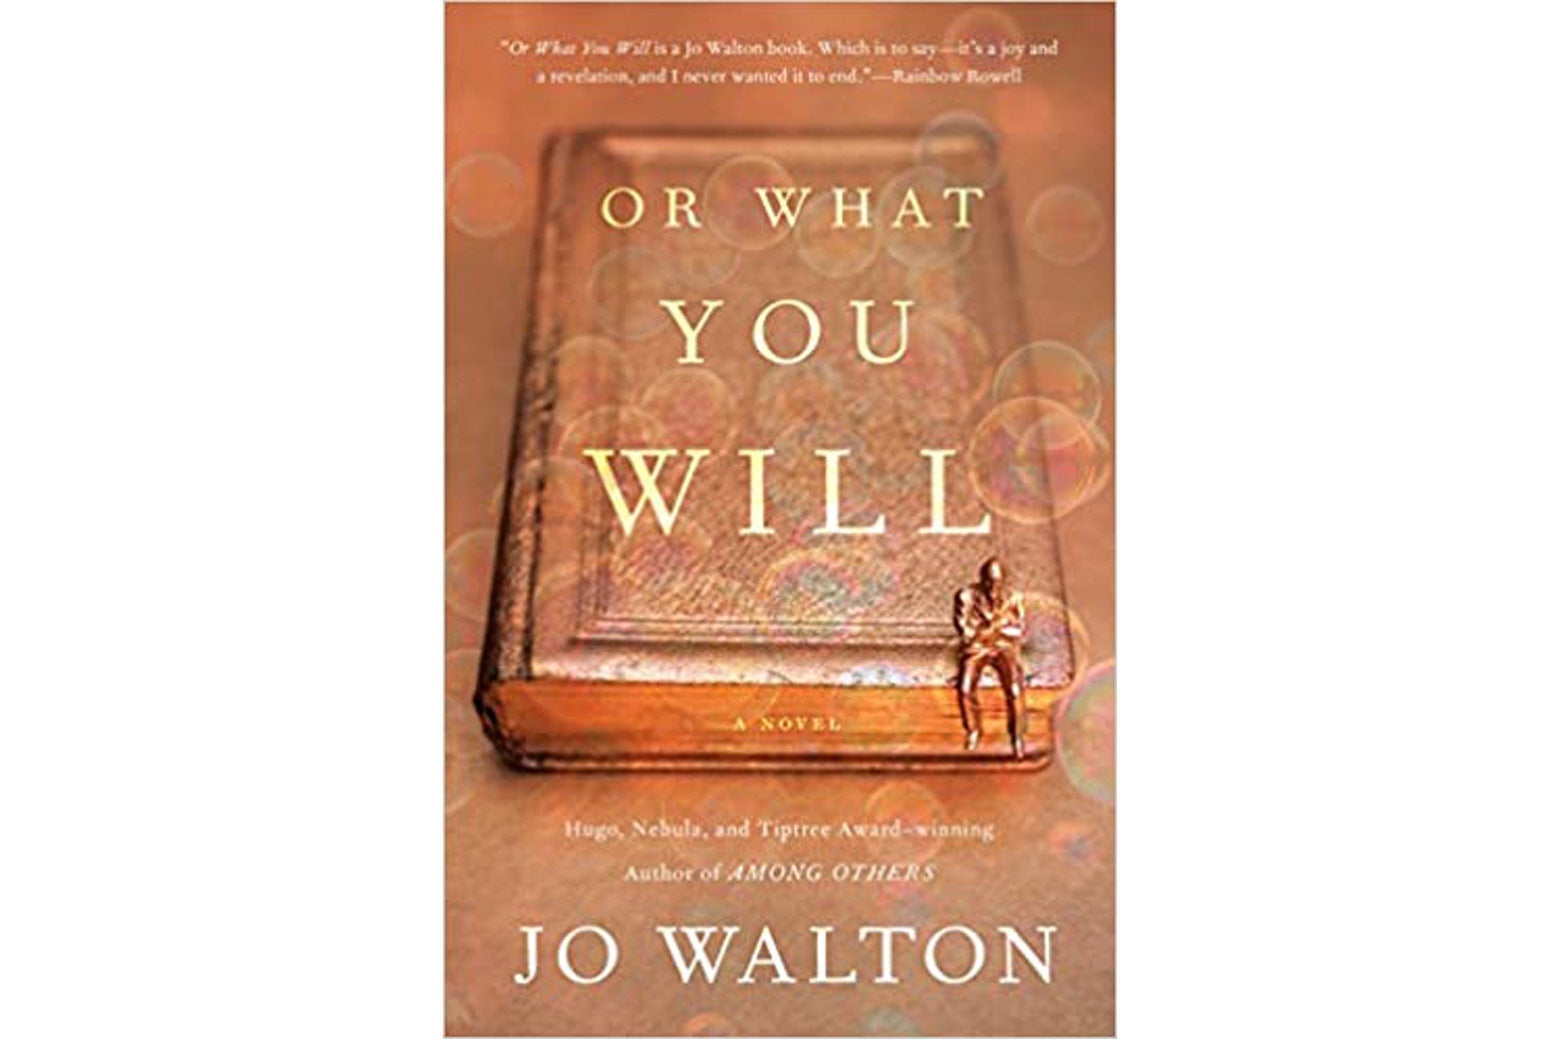 The cover of Or What You Will.